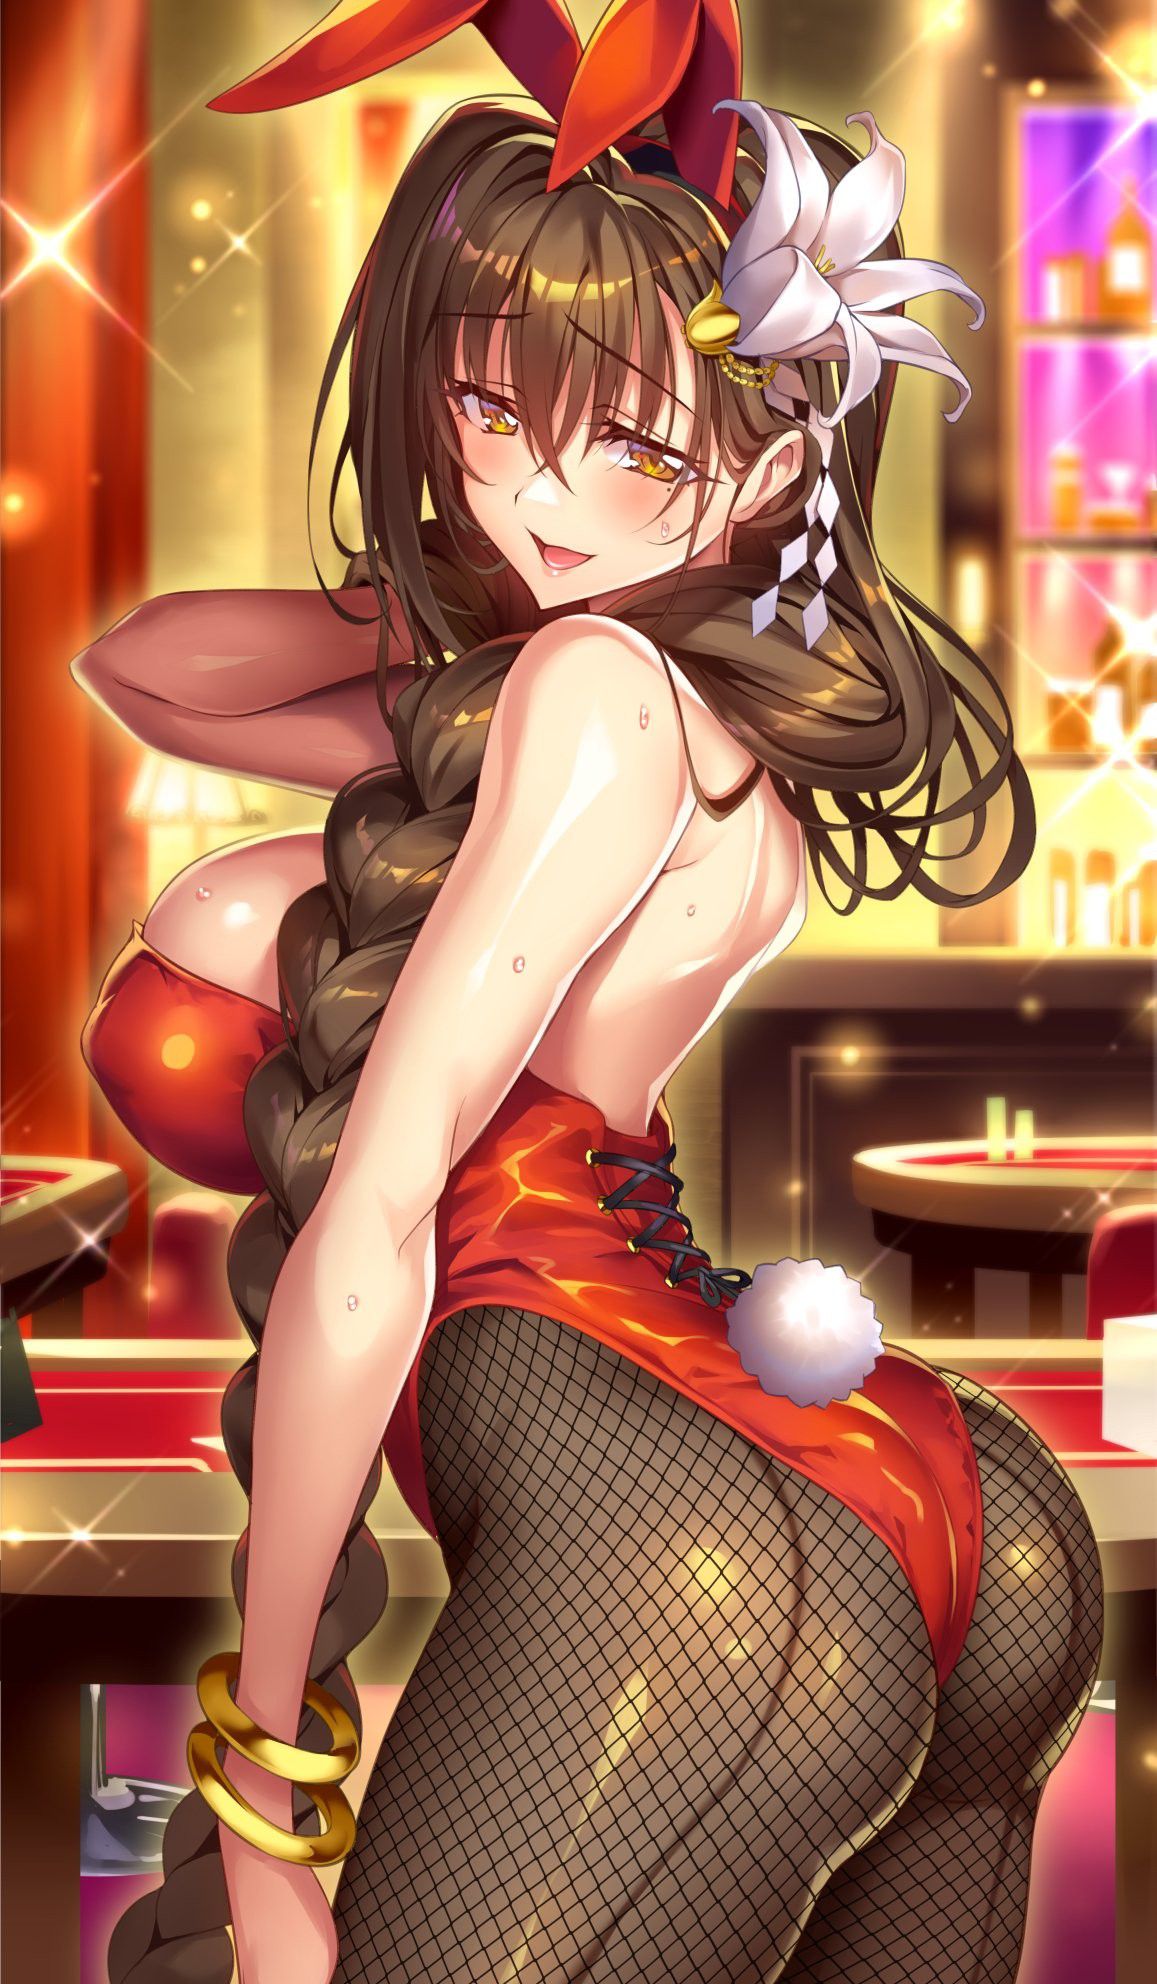 【Secondary Erotic】 Here is an erotic image of a girl dressed in a bunny girl costume that stands out for the eroticism of buttocks and 20